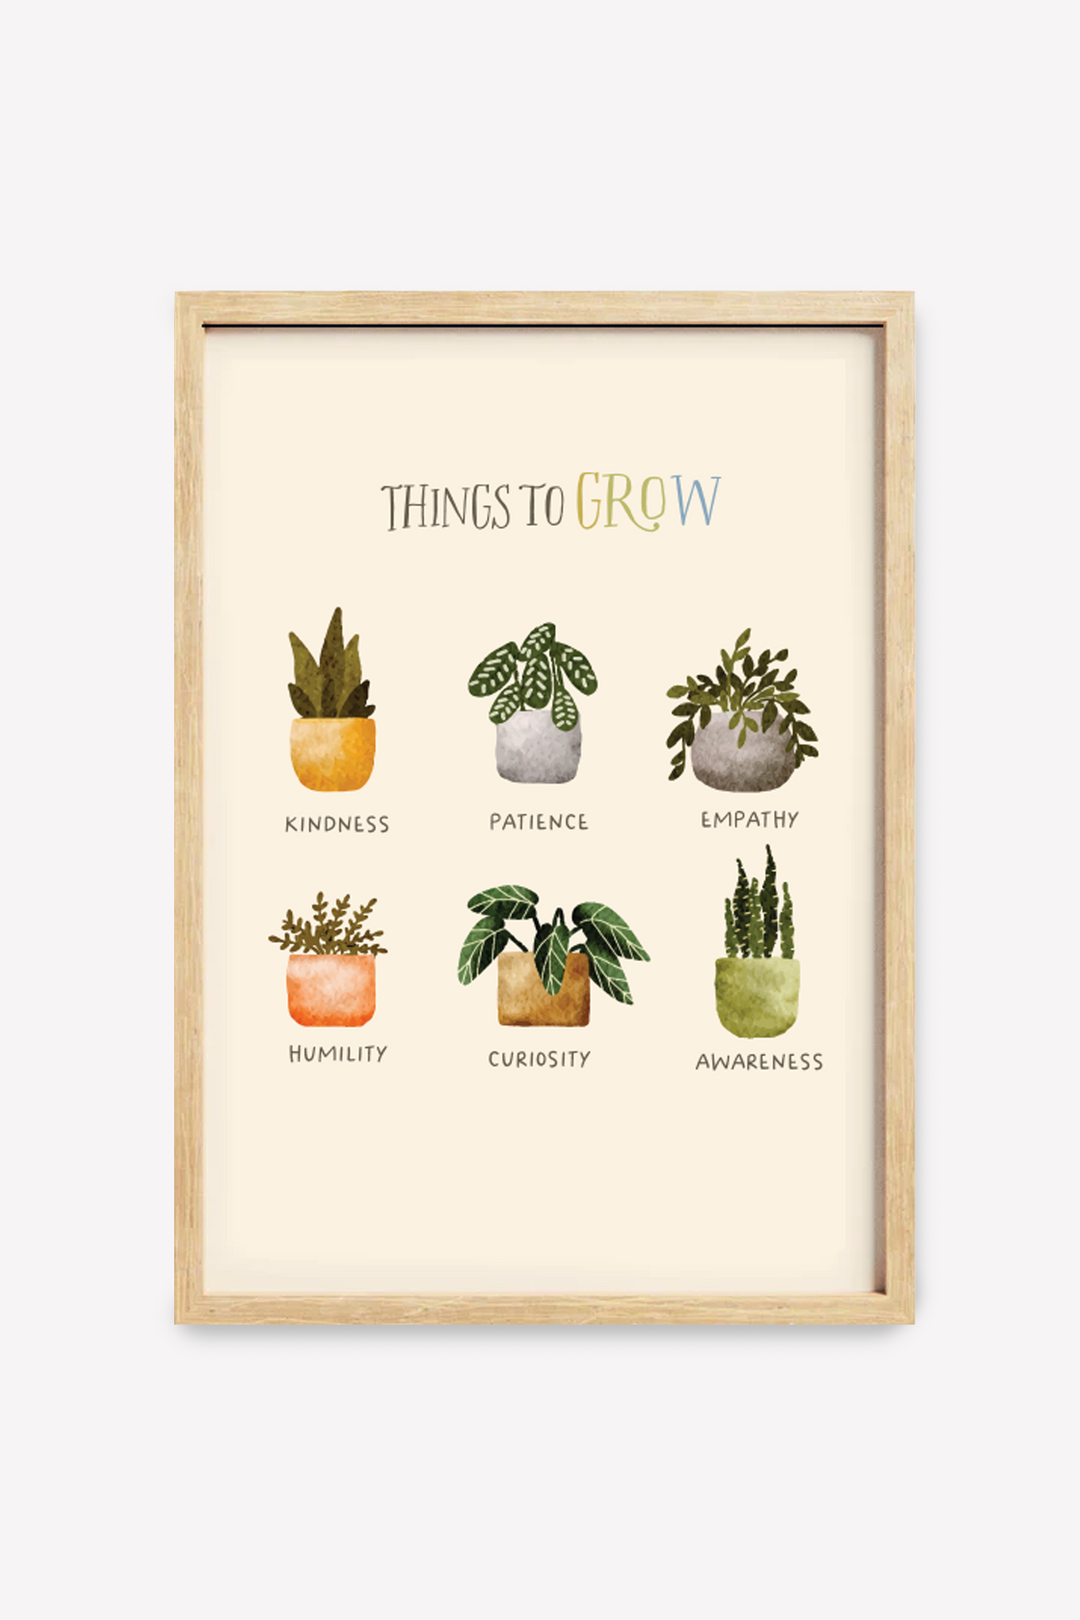 Things to grow